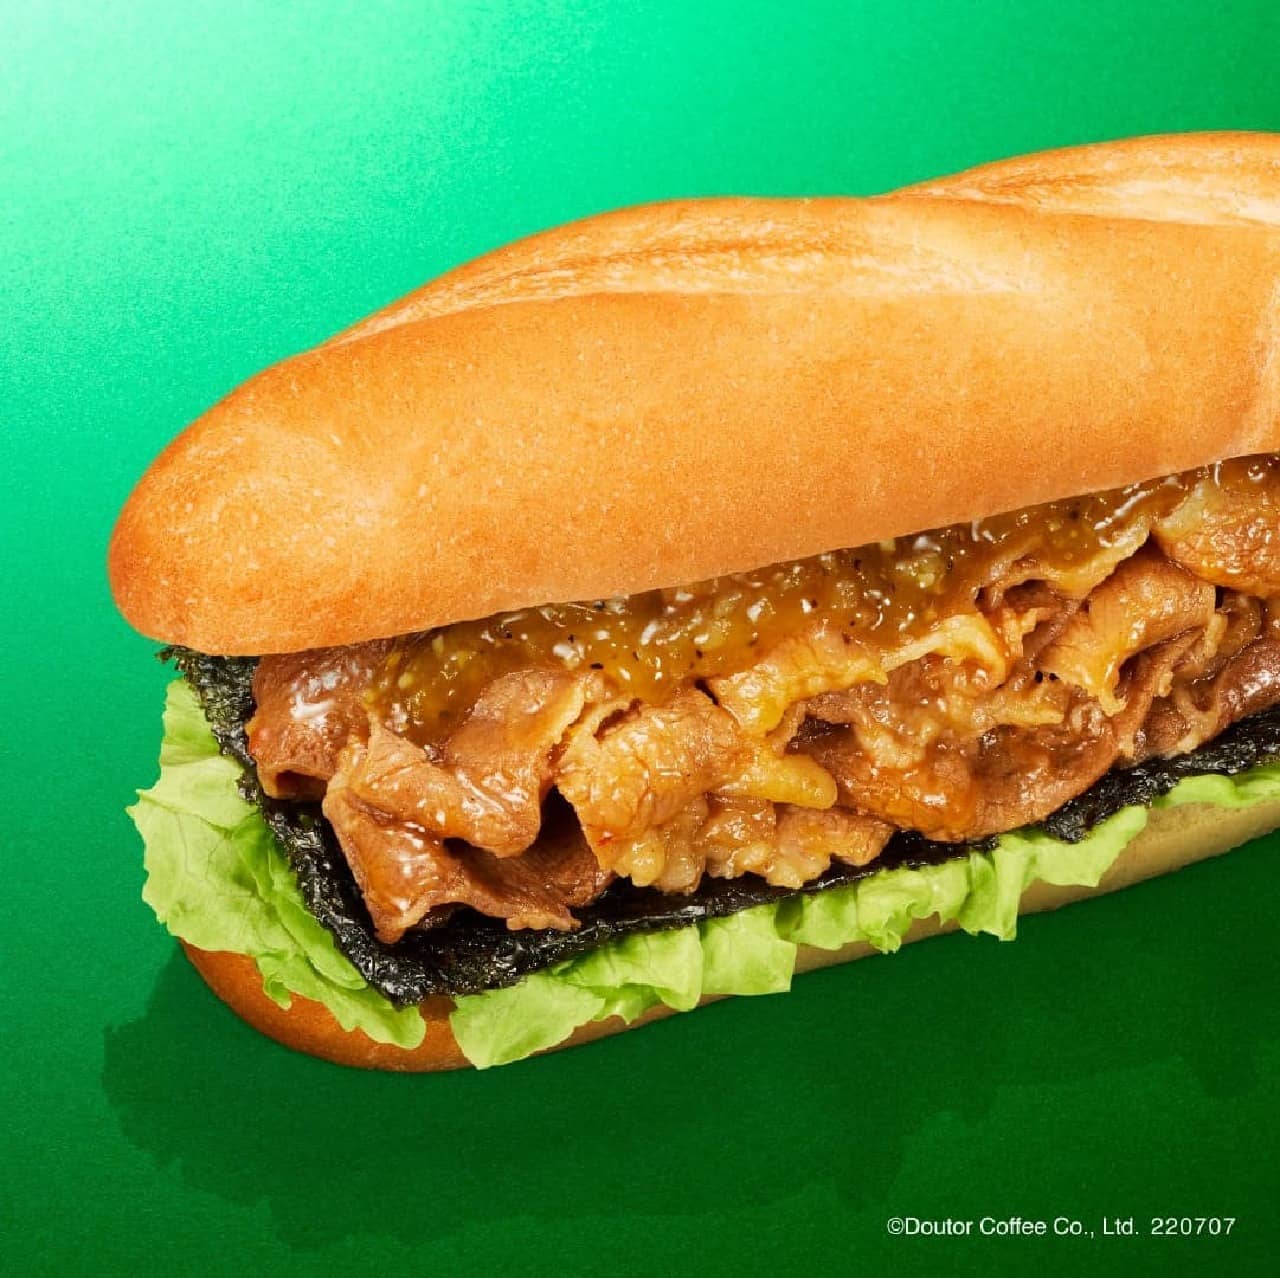 Doutor "Limited Time Milano Sandwich - Beef Kalbi with Jalapeno Sauce